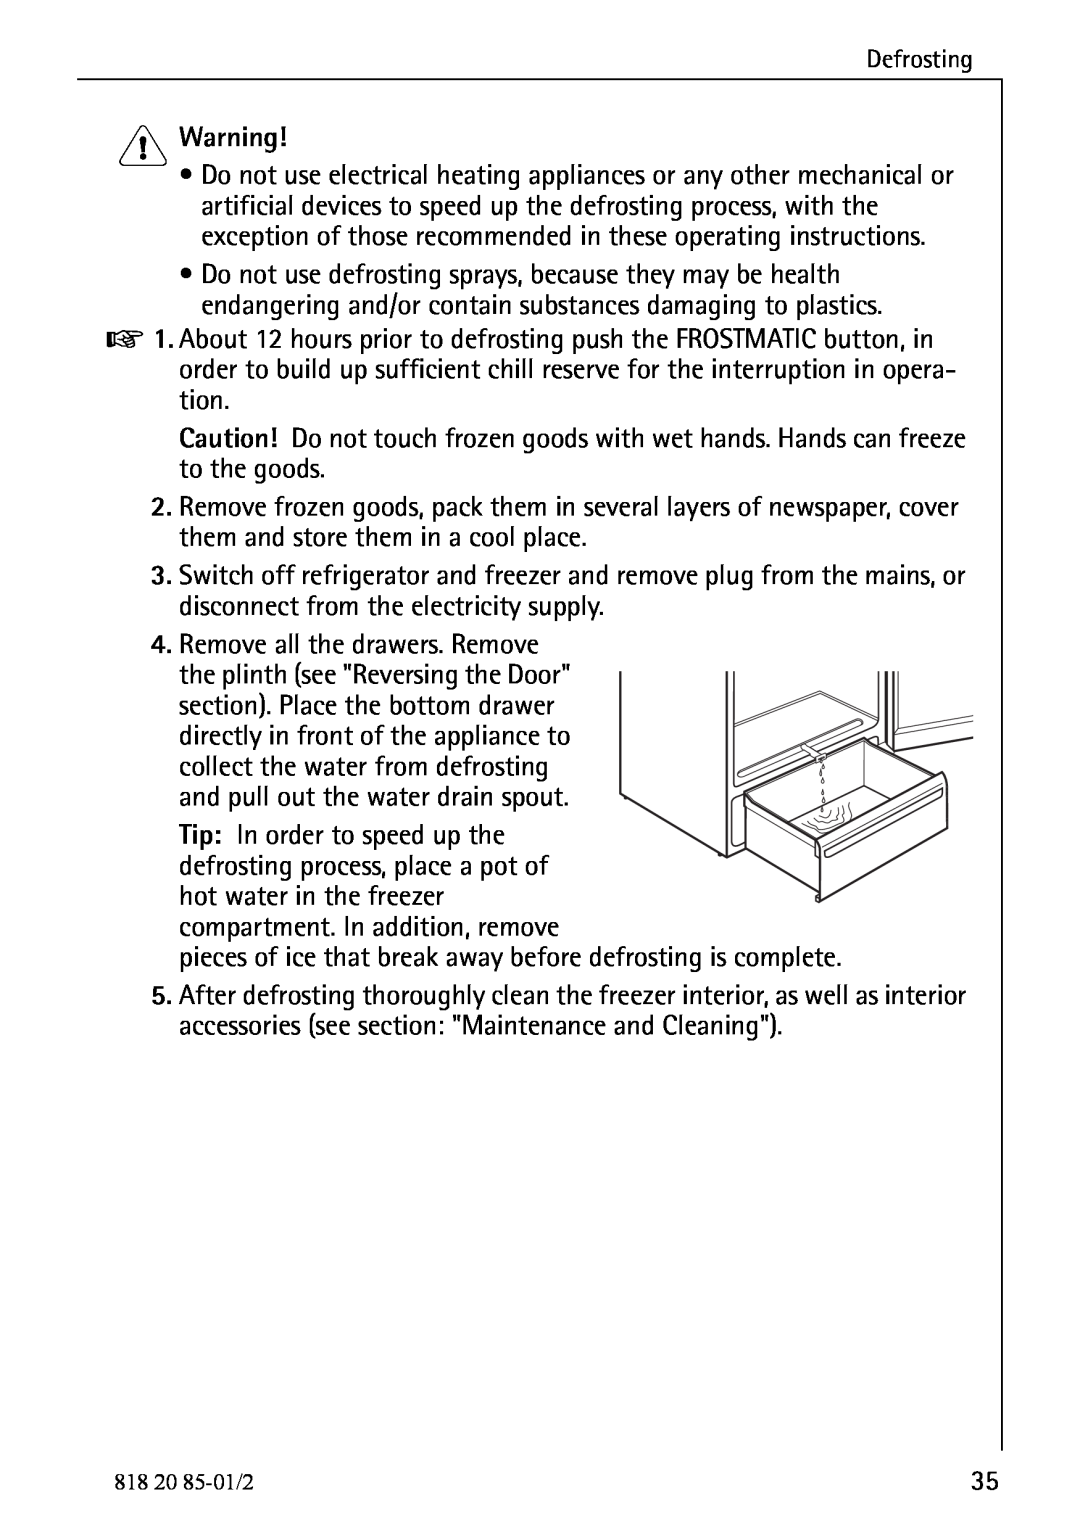 Electrolux 818 20 85 operating instructions Warning, the plinth see Reversing the Door section. Place the bottom drawer 